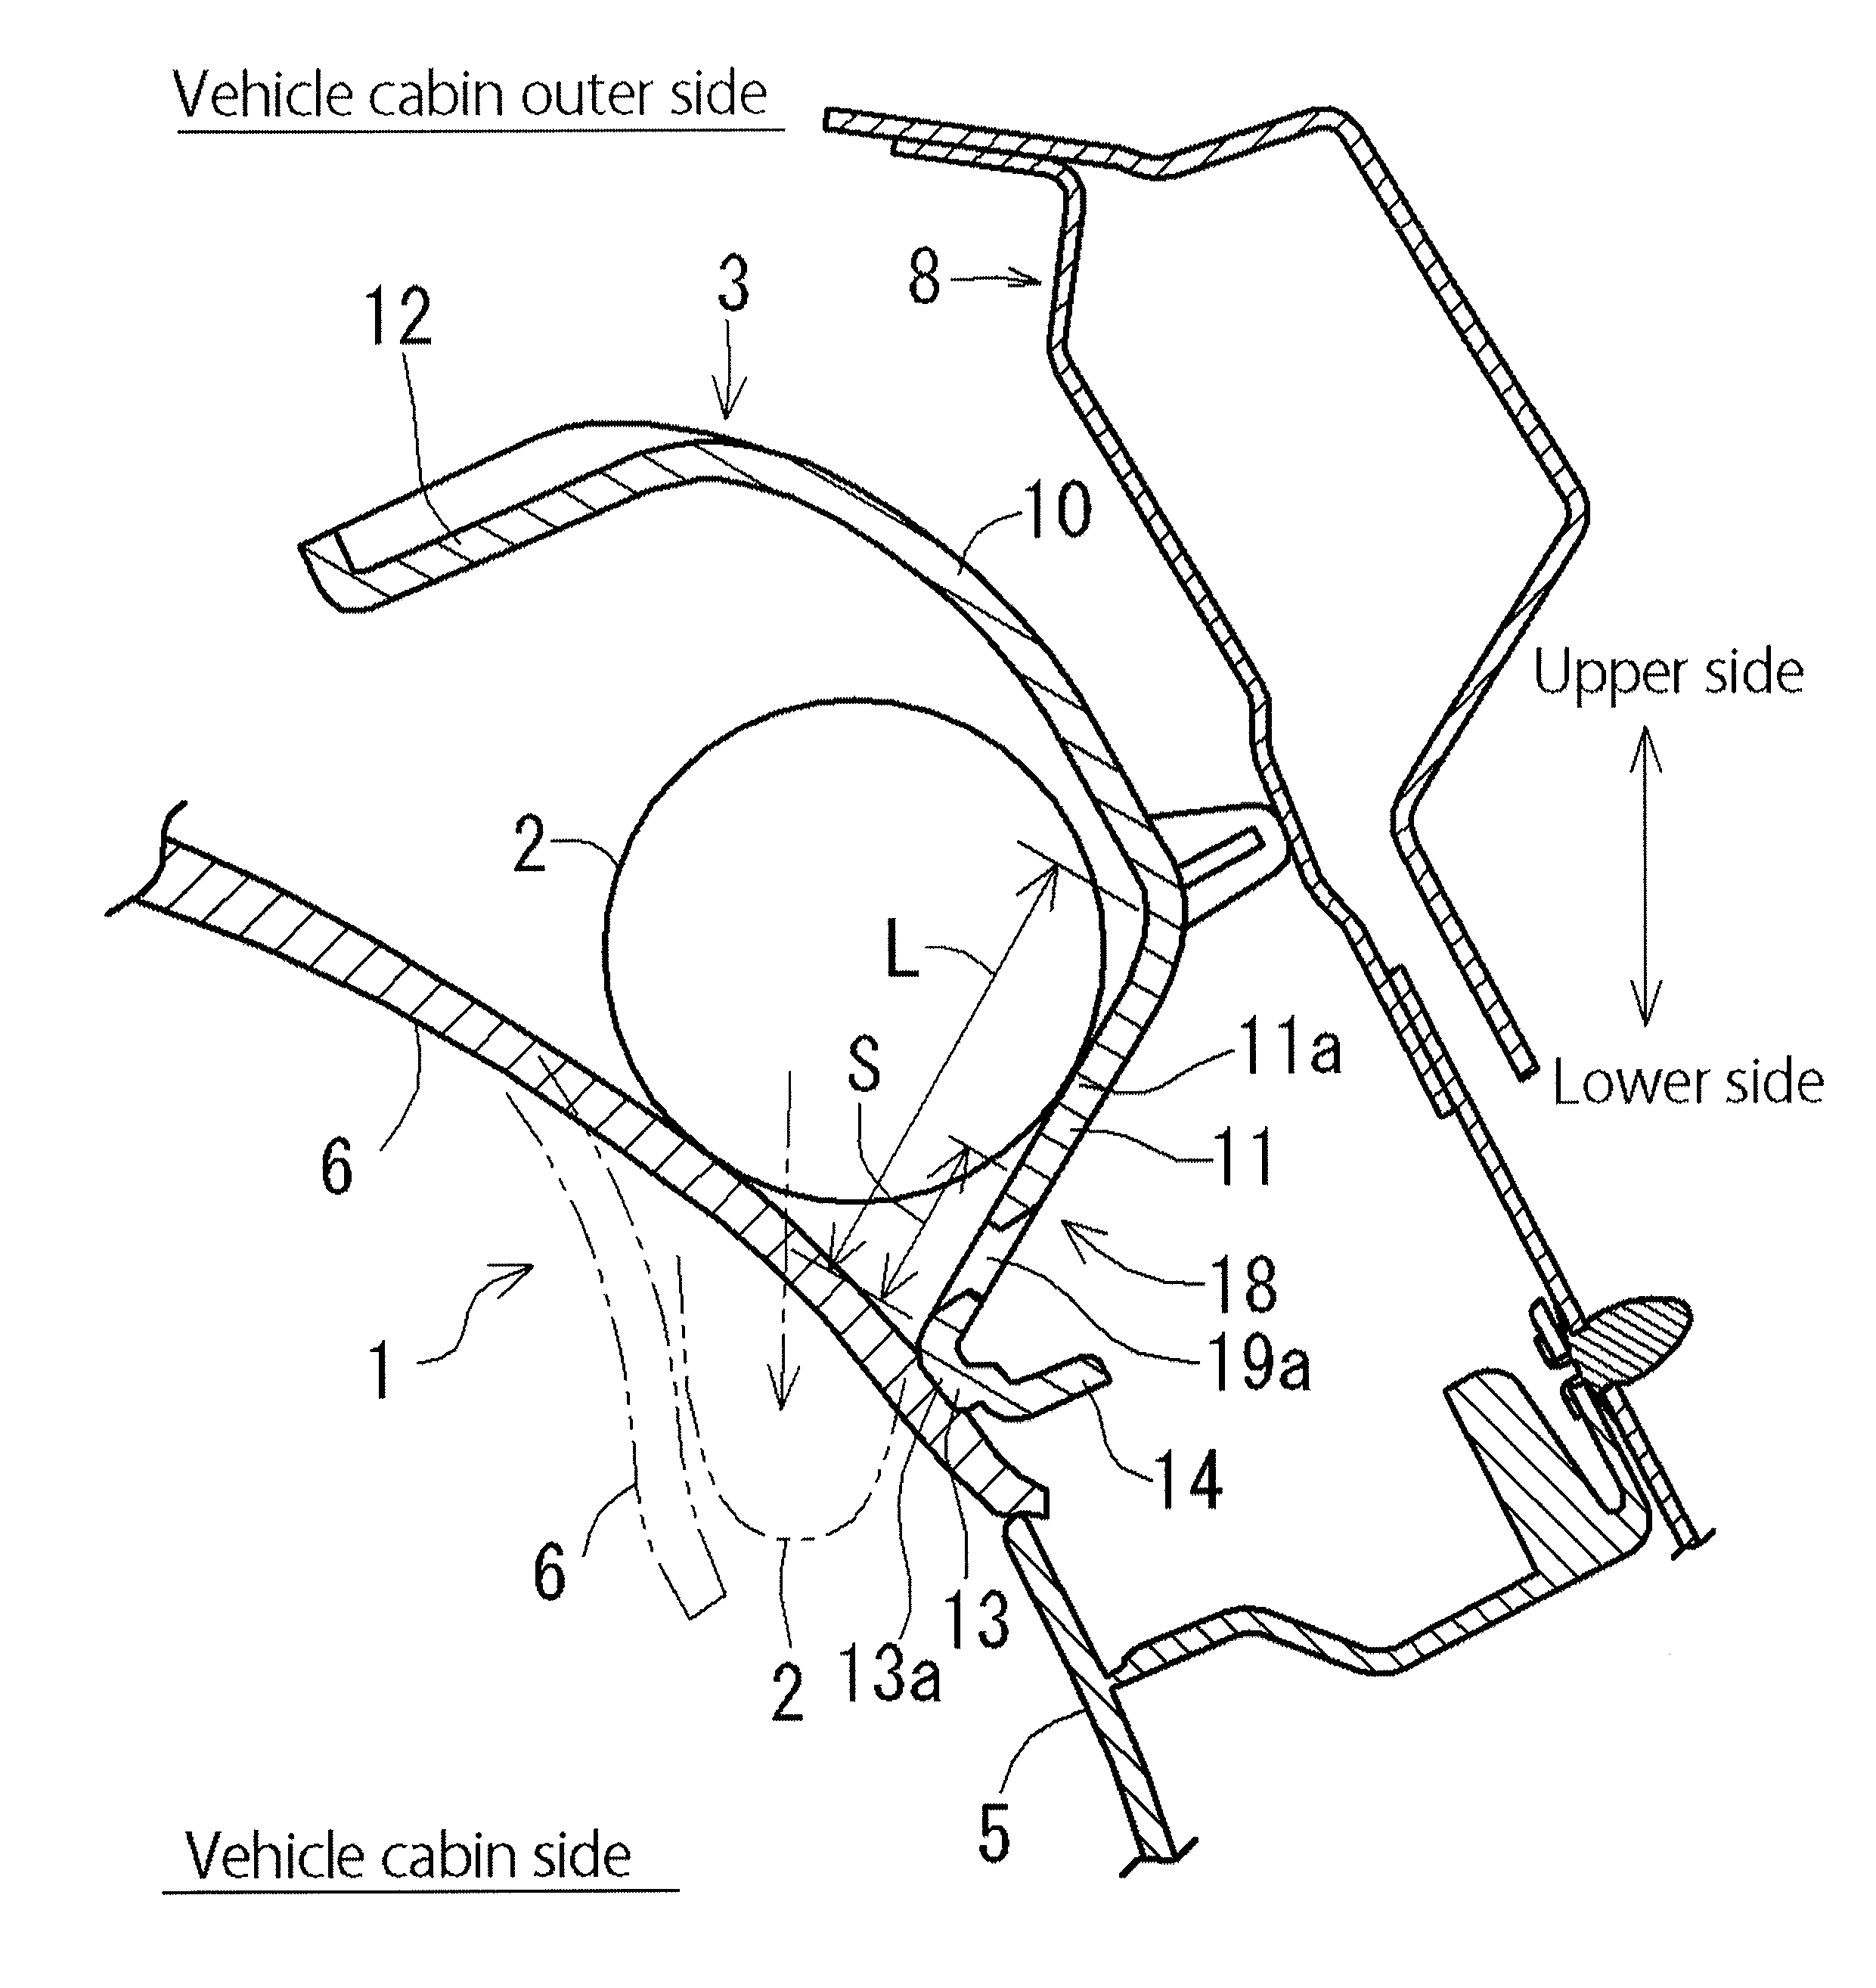 Head protection device and guiding bracket